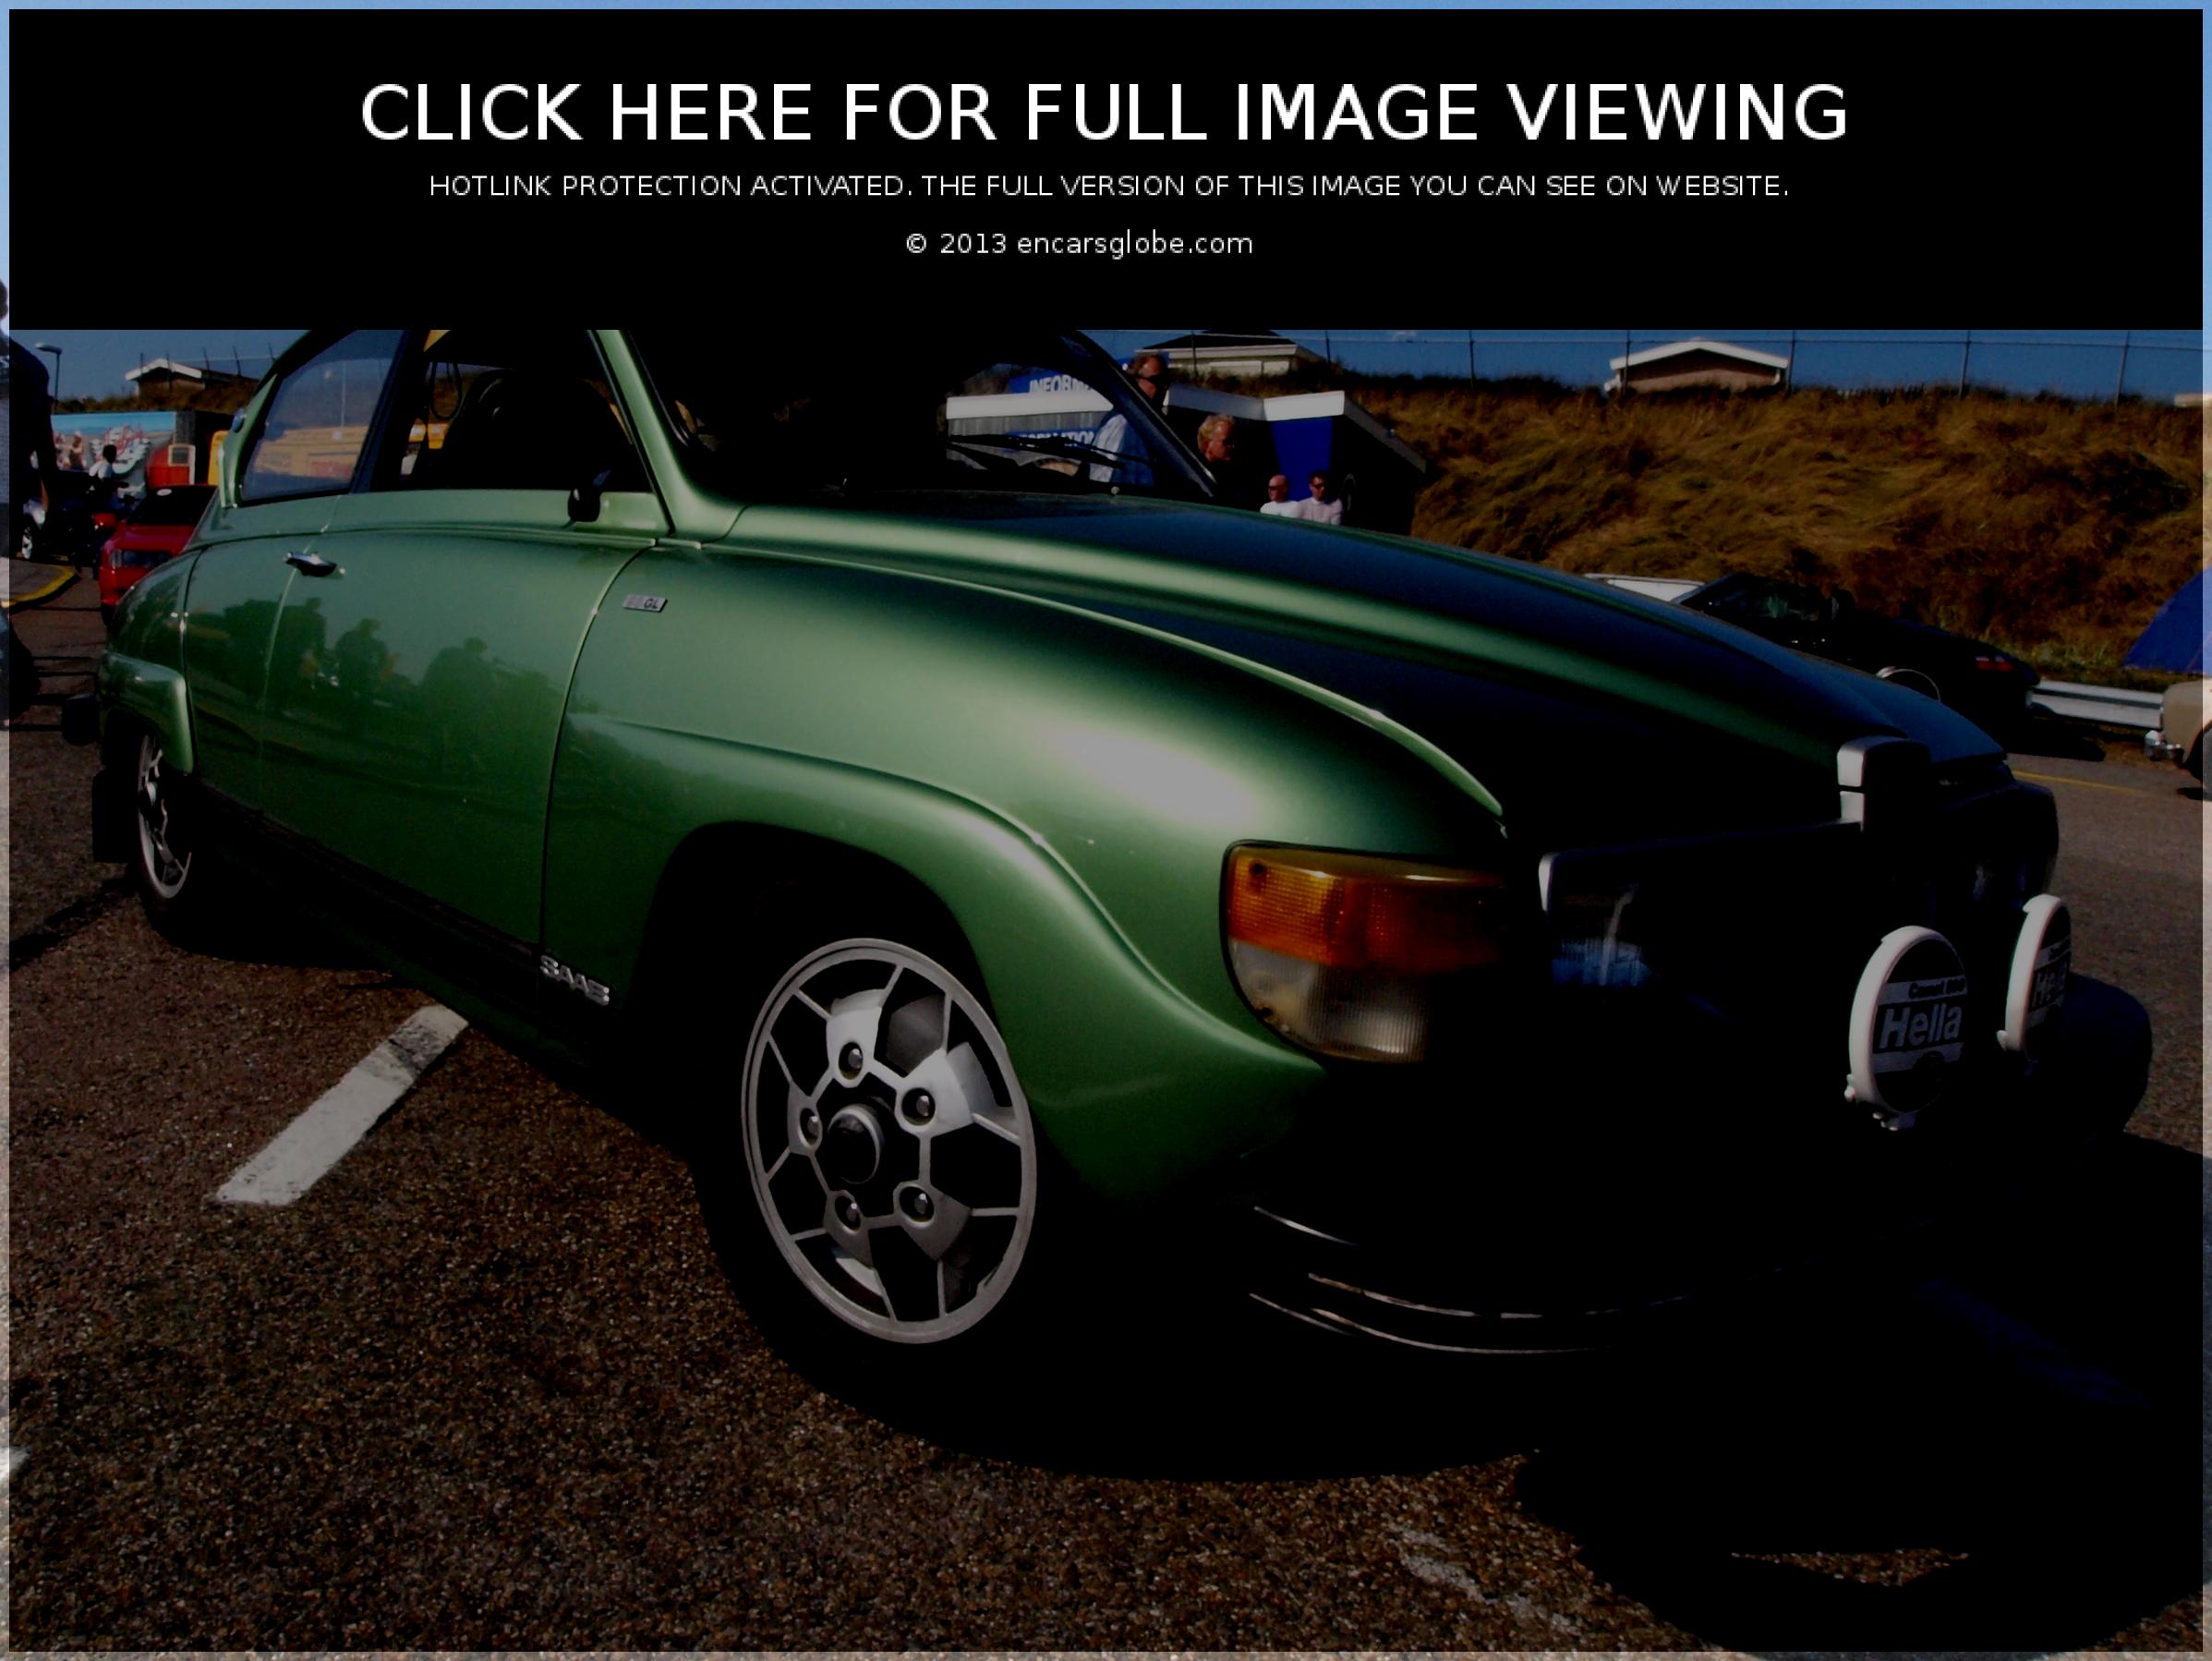 Saab 96 L Photo Gallery: Photo #10 out of 12, Image Size - 500 x ...